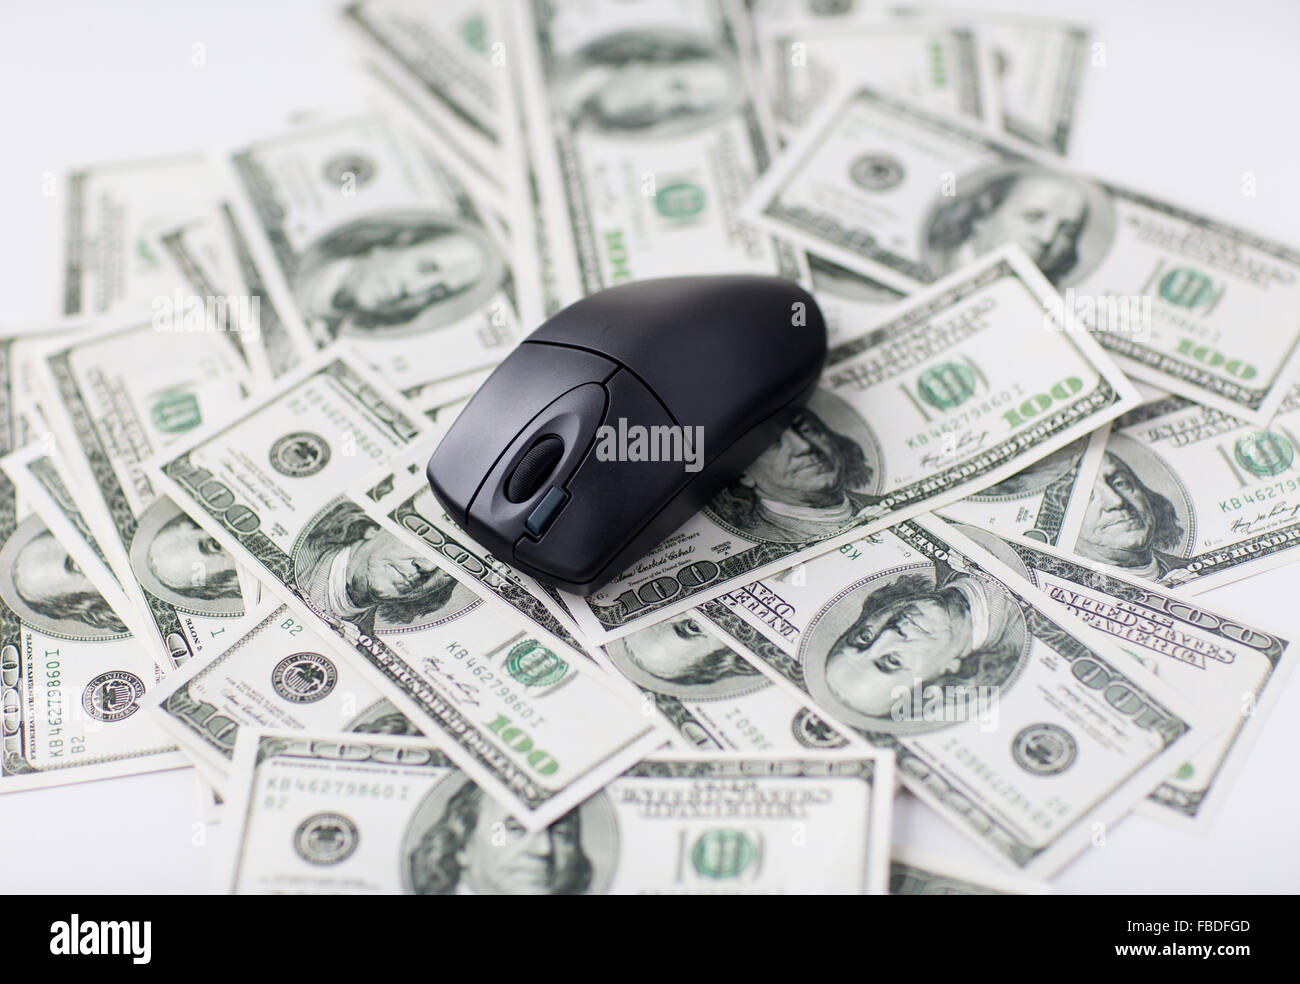 close up of computer mouse and dollar cash money Stock Photo